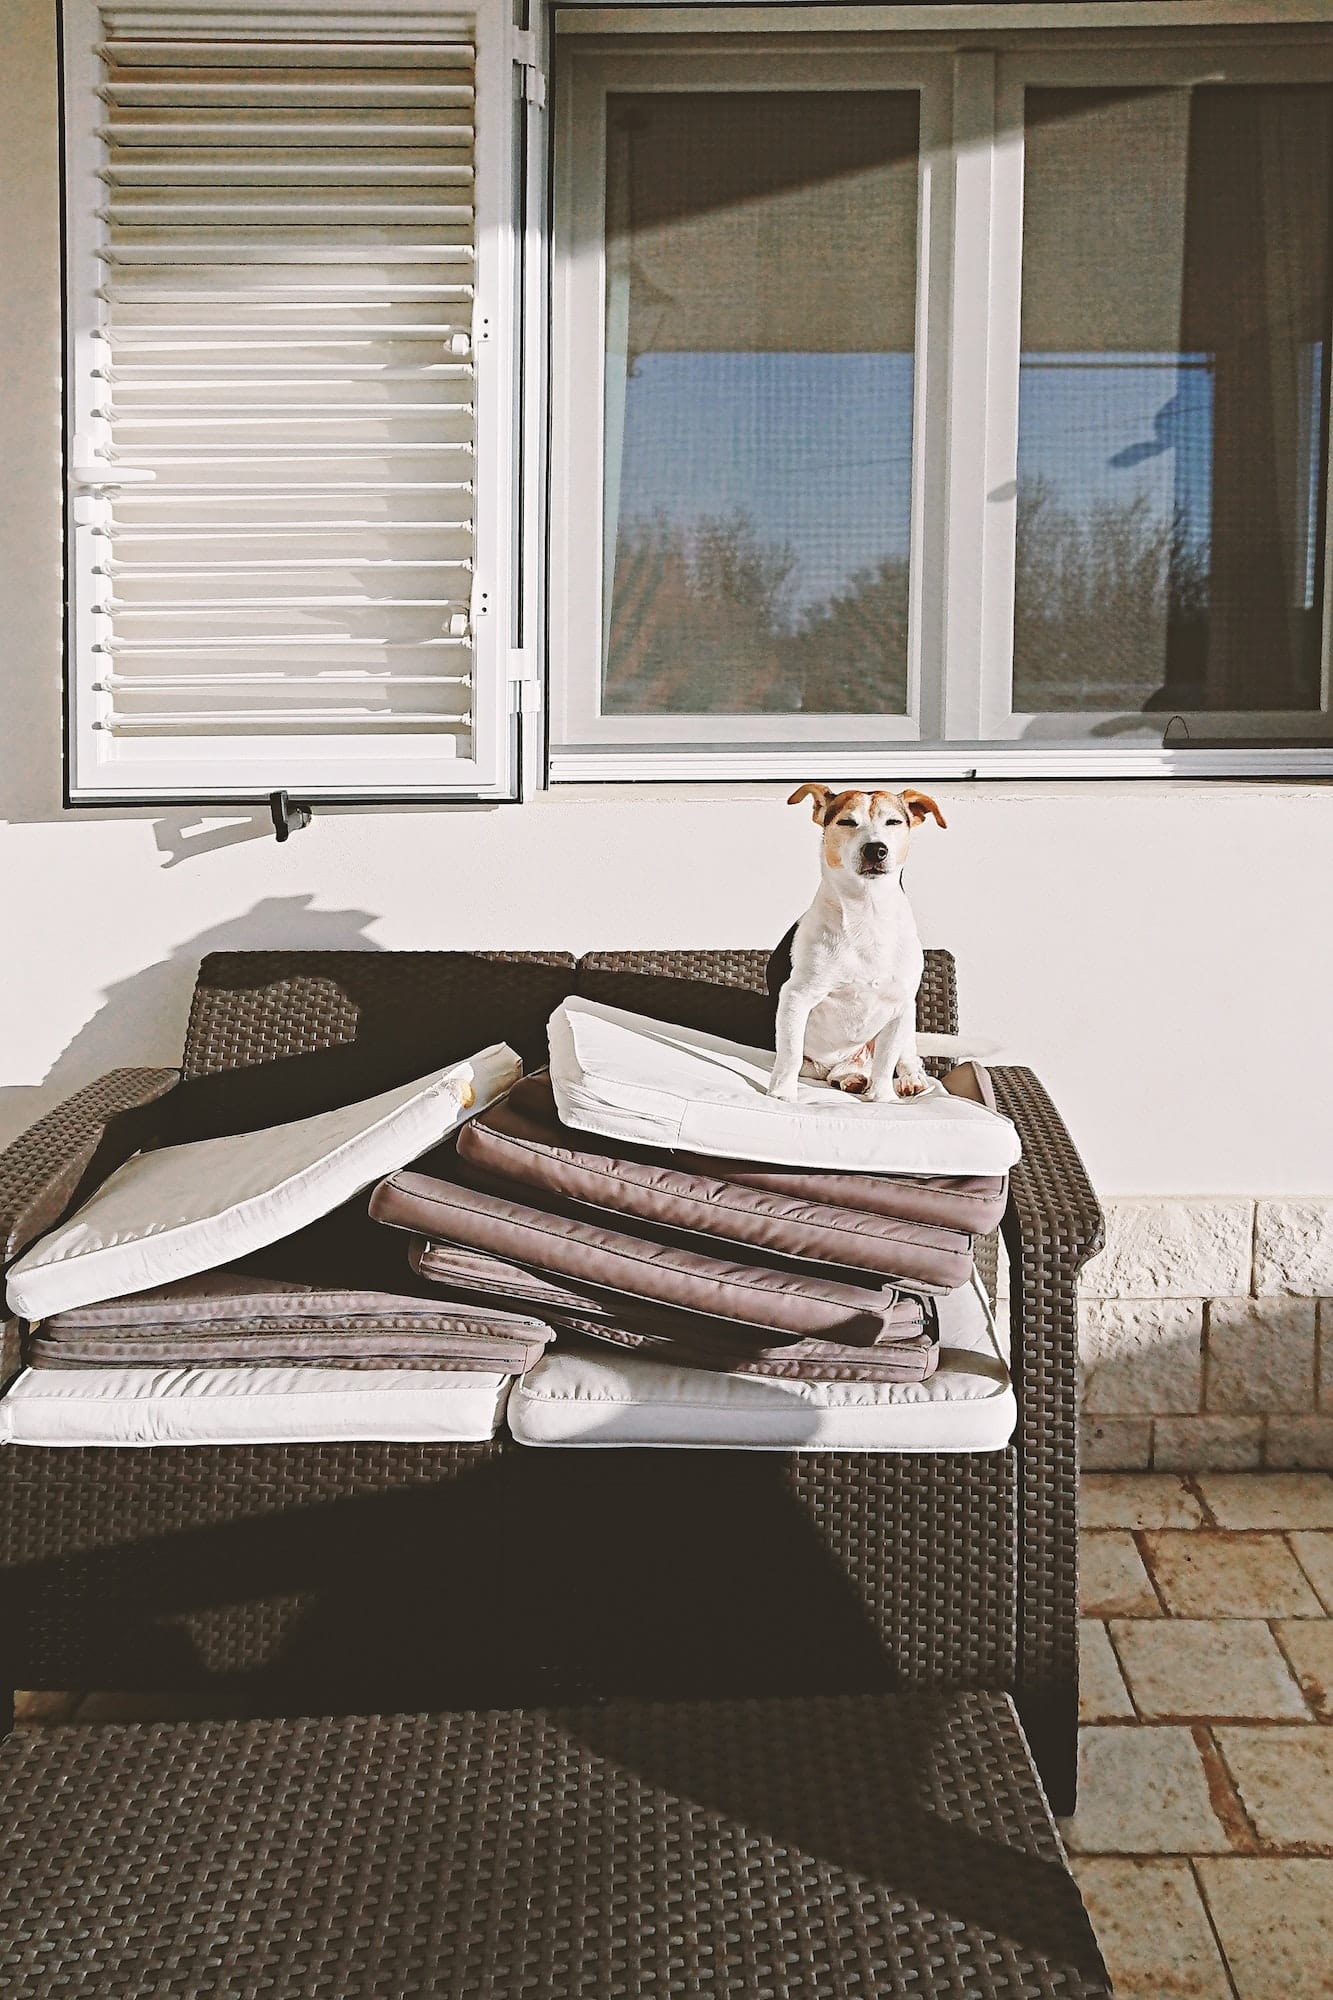 Funnjack-And-Vanilla-Hondenmandy Dog Sits On A Pile Of Pillows And Enjoys The Sun